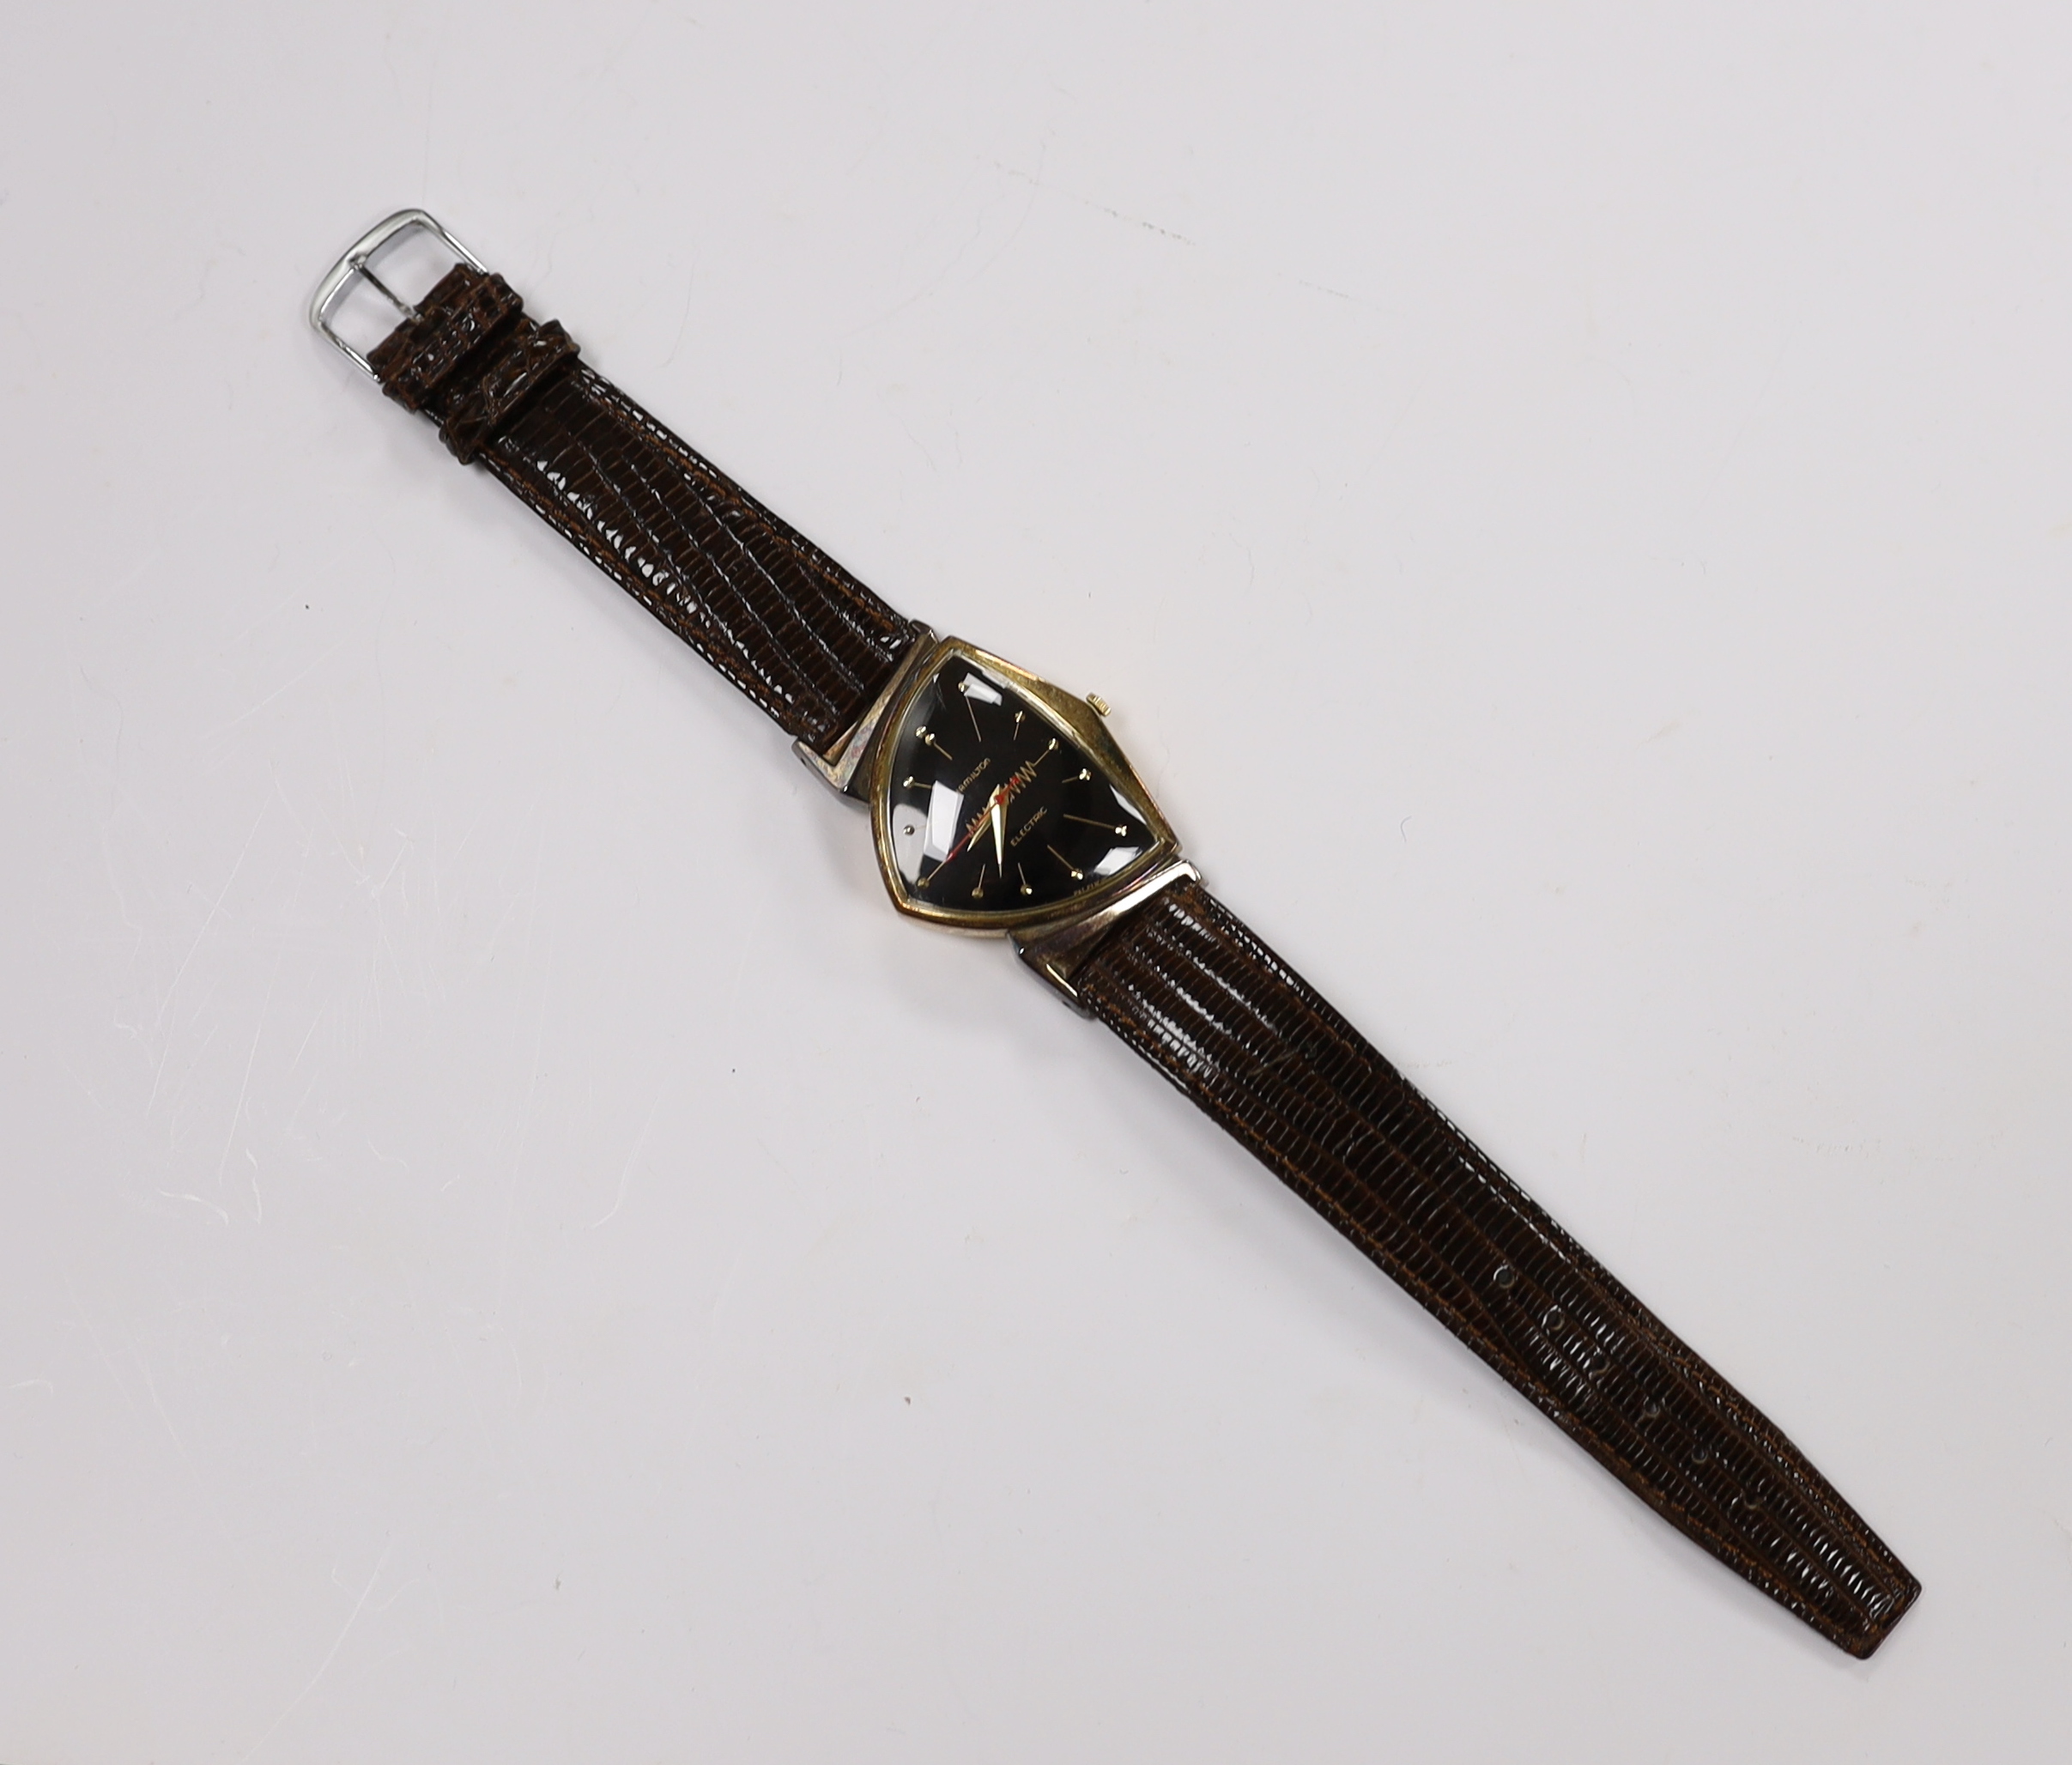 A gentleman's 10k gold filled Hamilton Electronic wrist watch, on a later lizard strap, with Hamilton box.